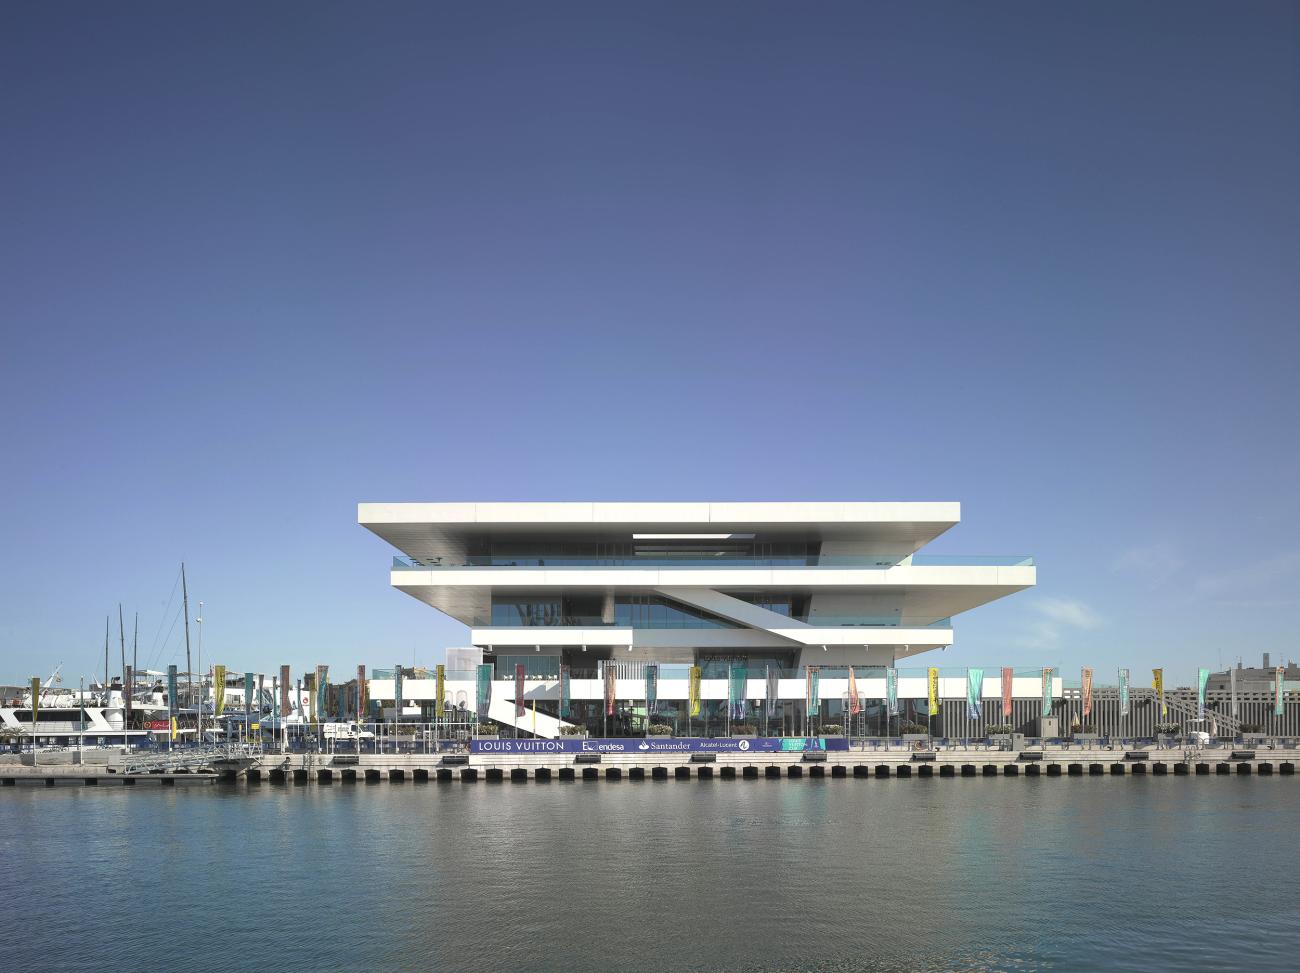 America’s Cup Building